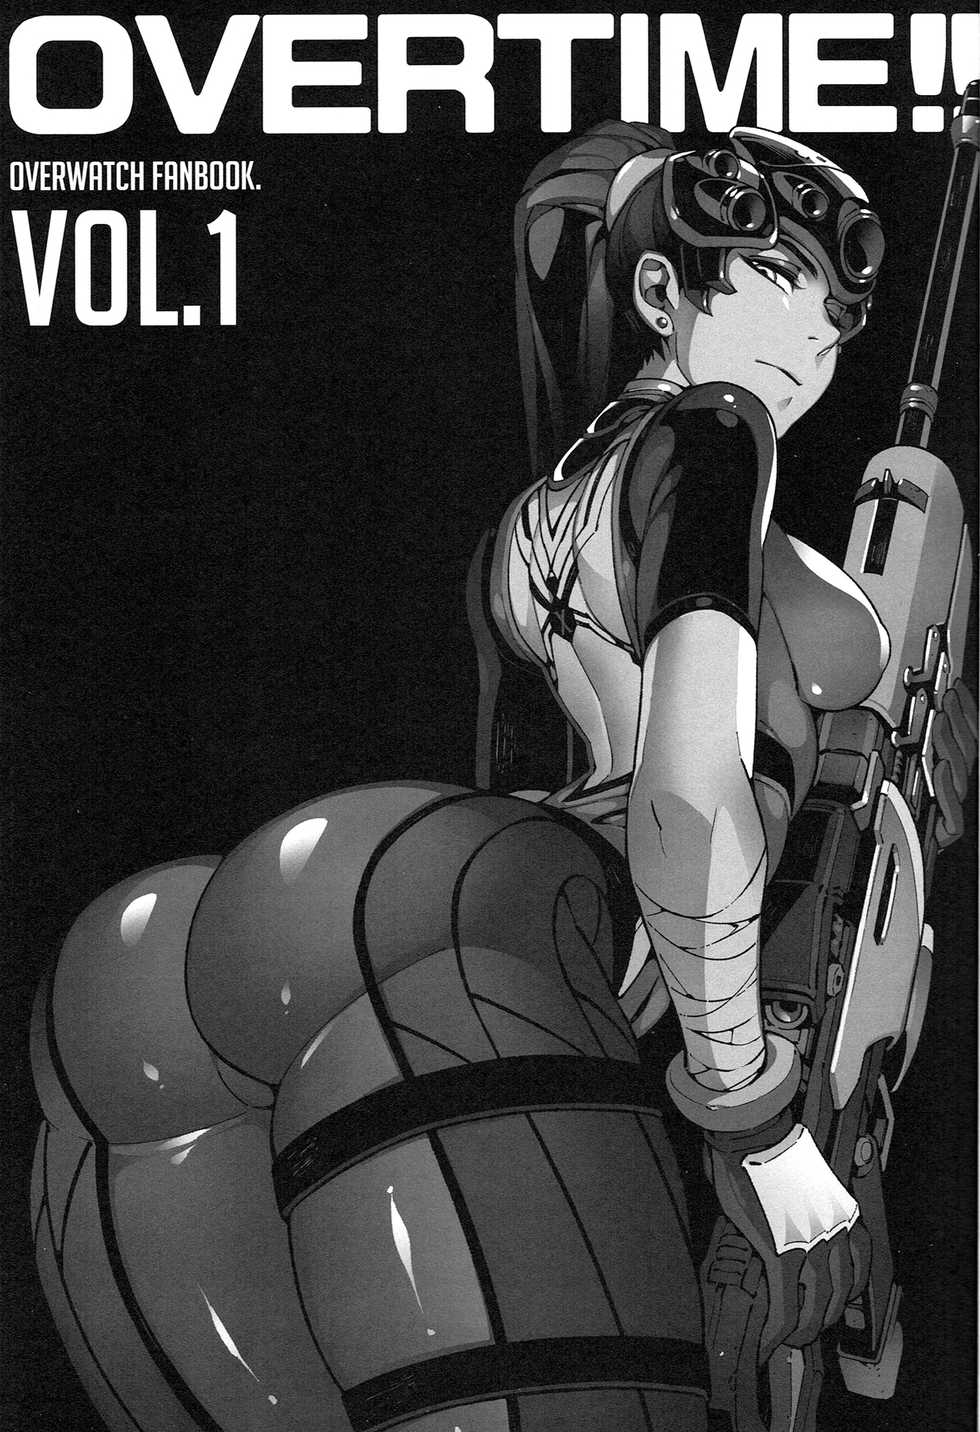 (FF29) [Bear Hand (Fishine, Ireading)] OVERTIME!! OVERWATCH FANBOOK VOL.1 (Overwatch) [hentai-archive] {Italian} - Page 2